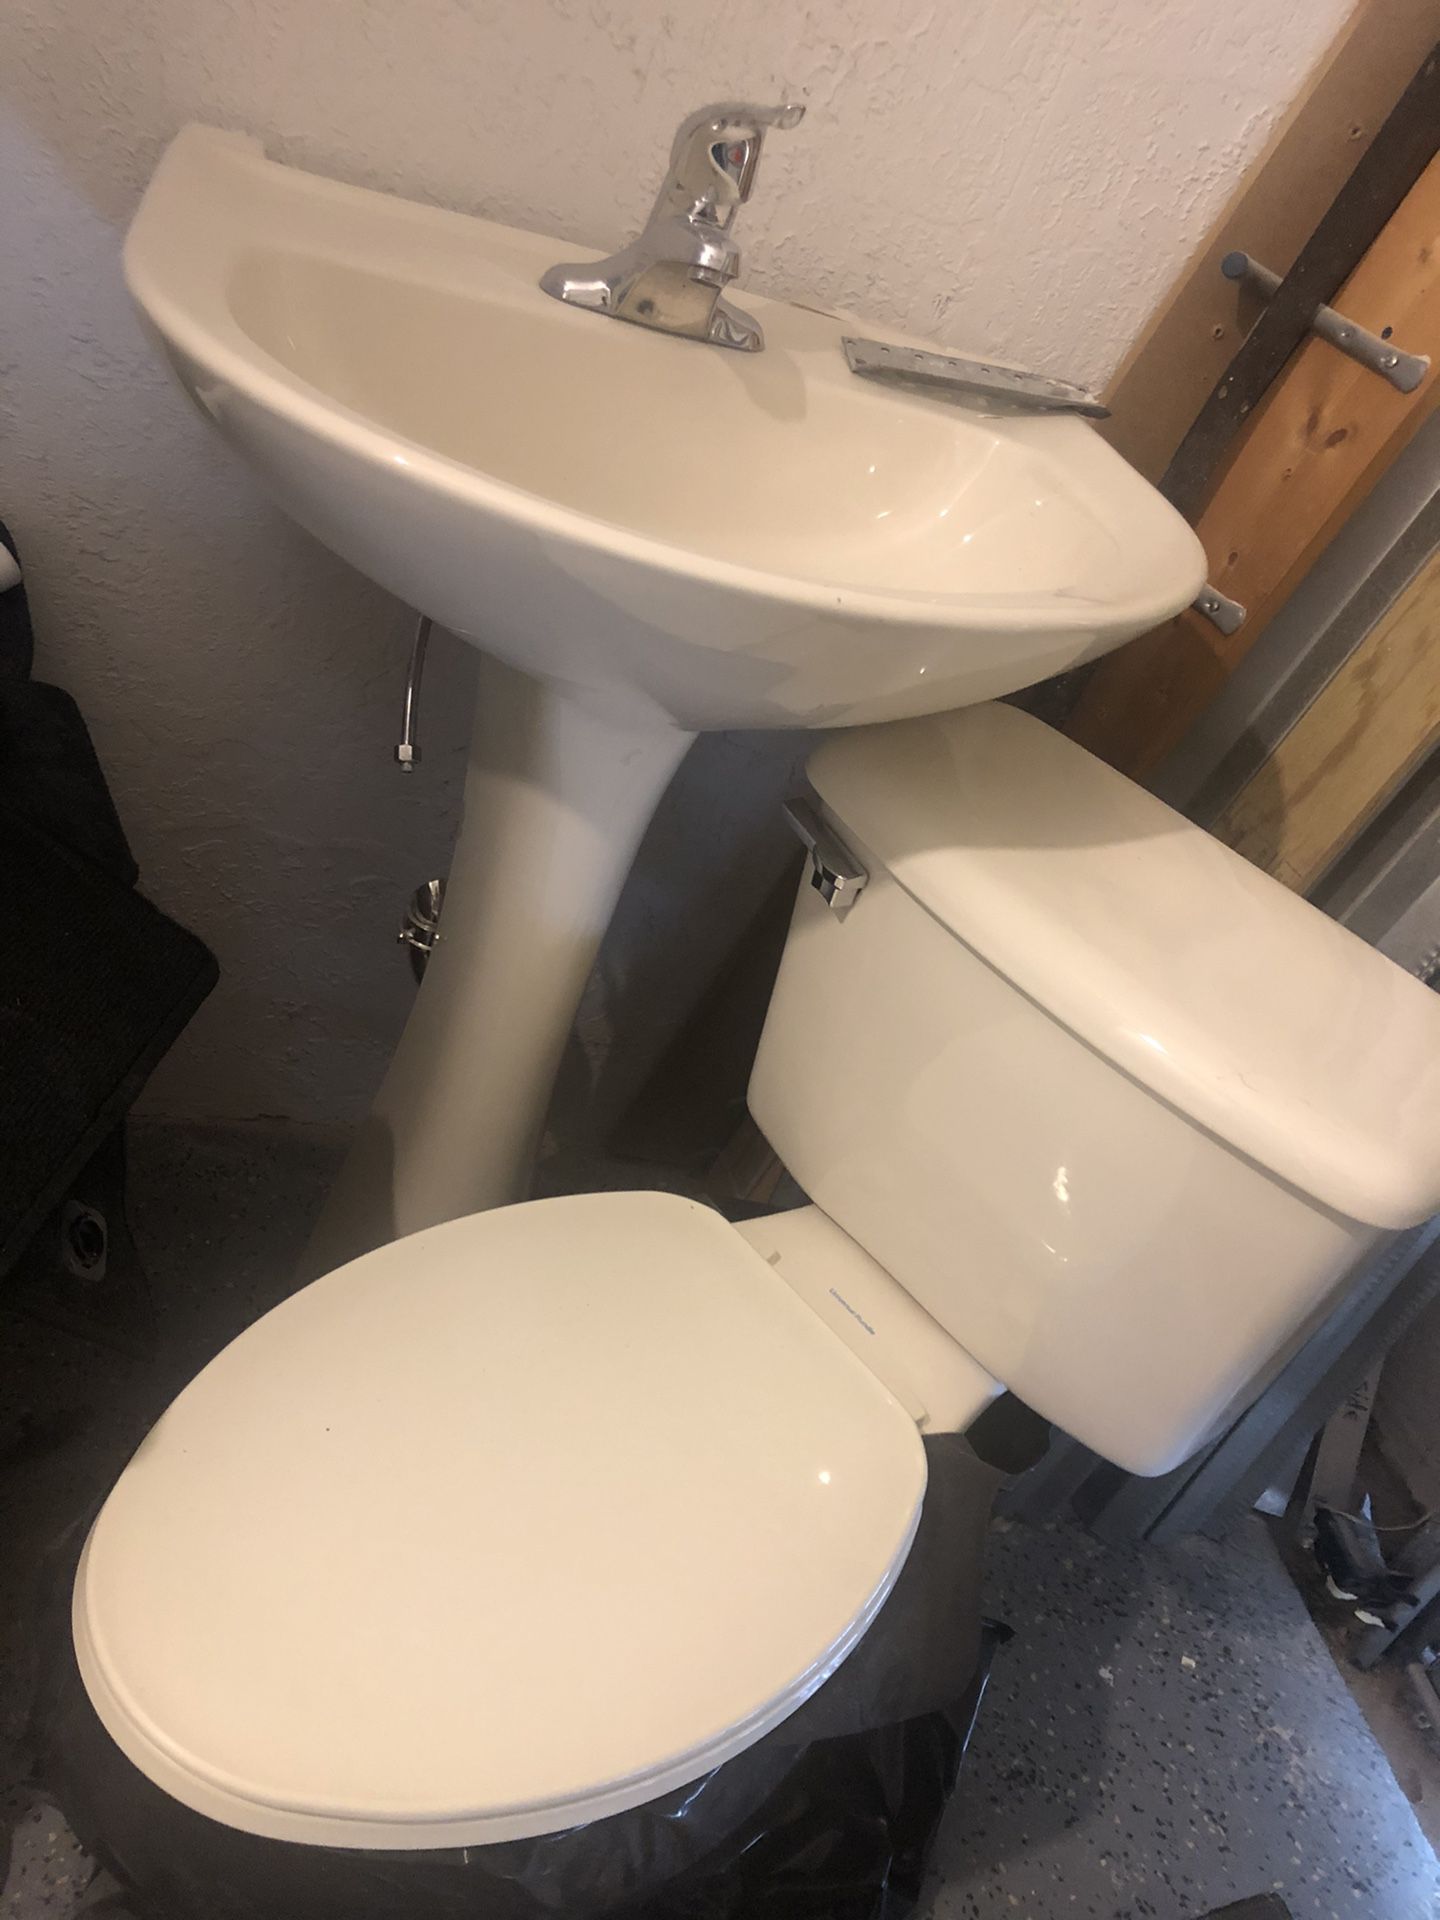 Bathrooms toilet and sink ( perfect conditions) $150.00